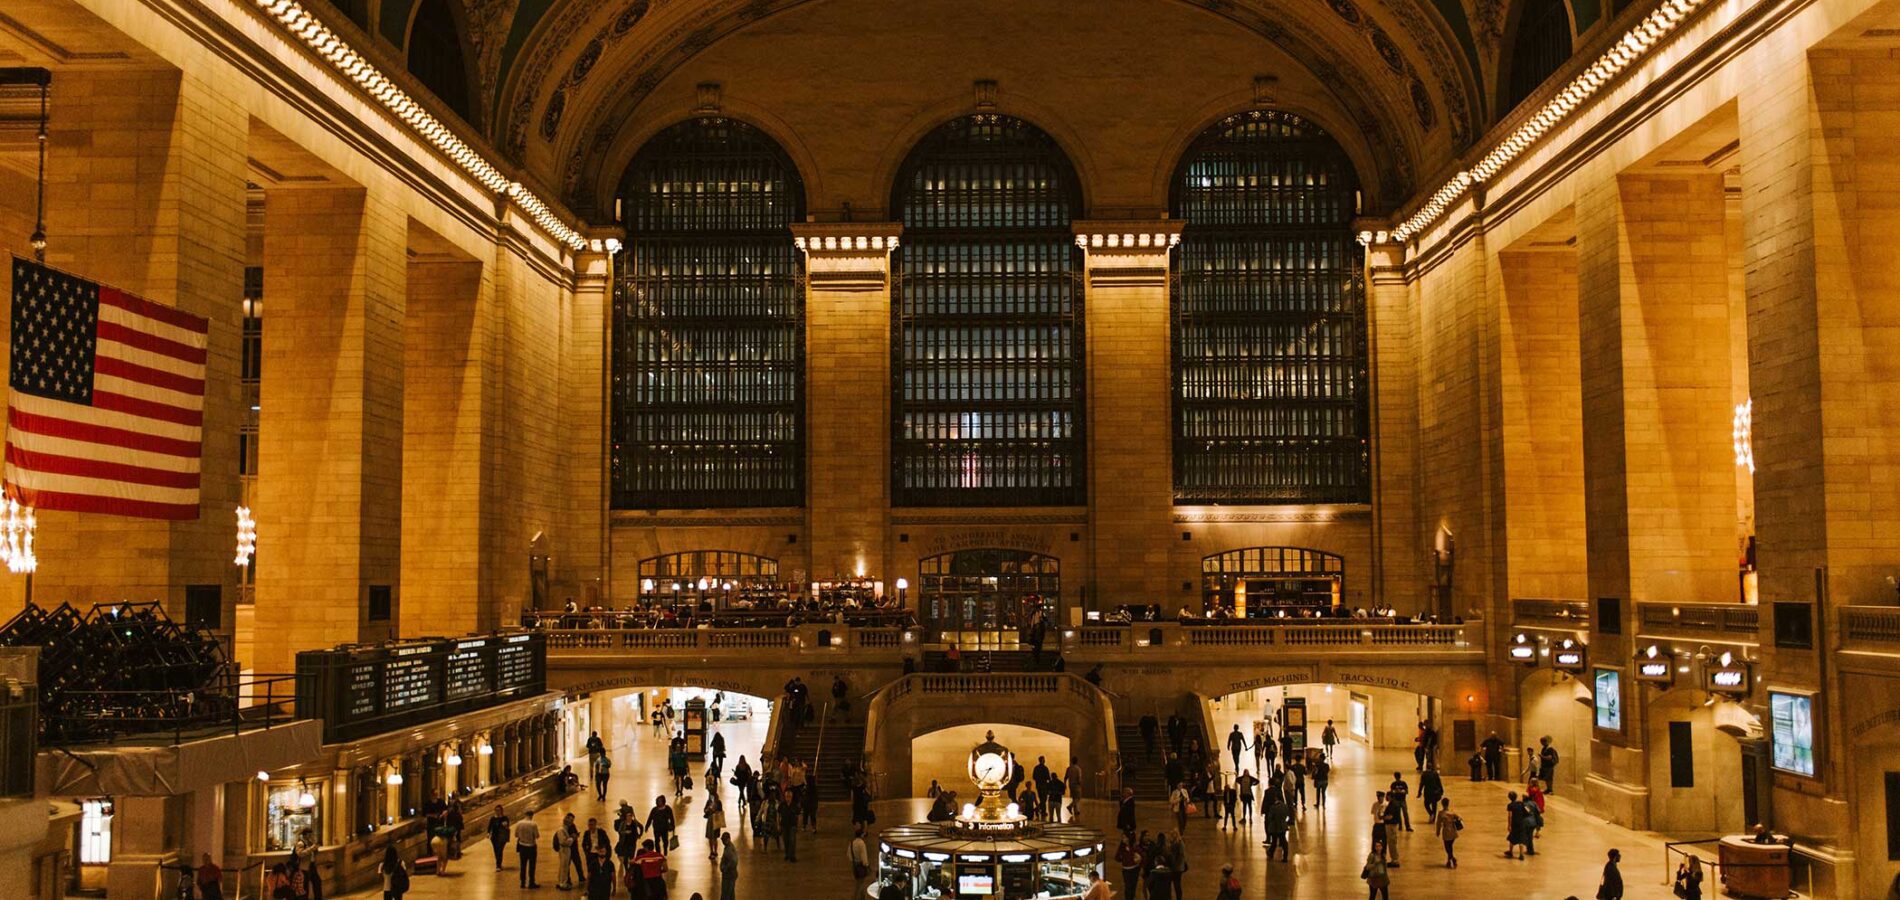 People in Grand Central Station